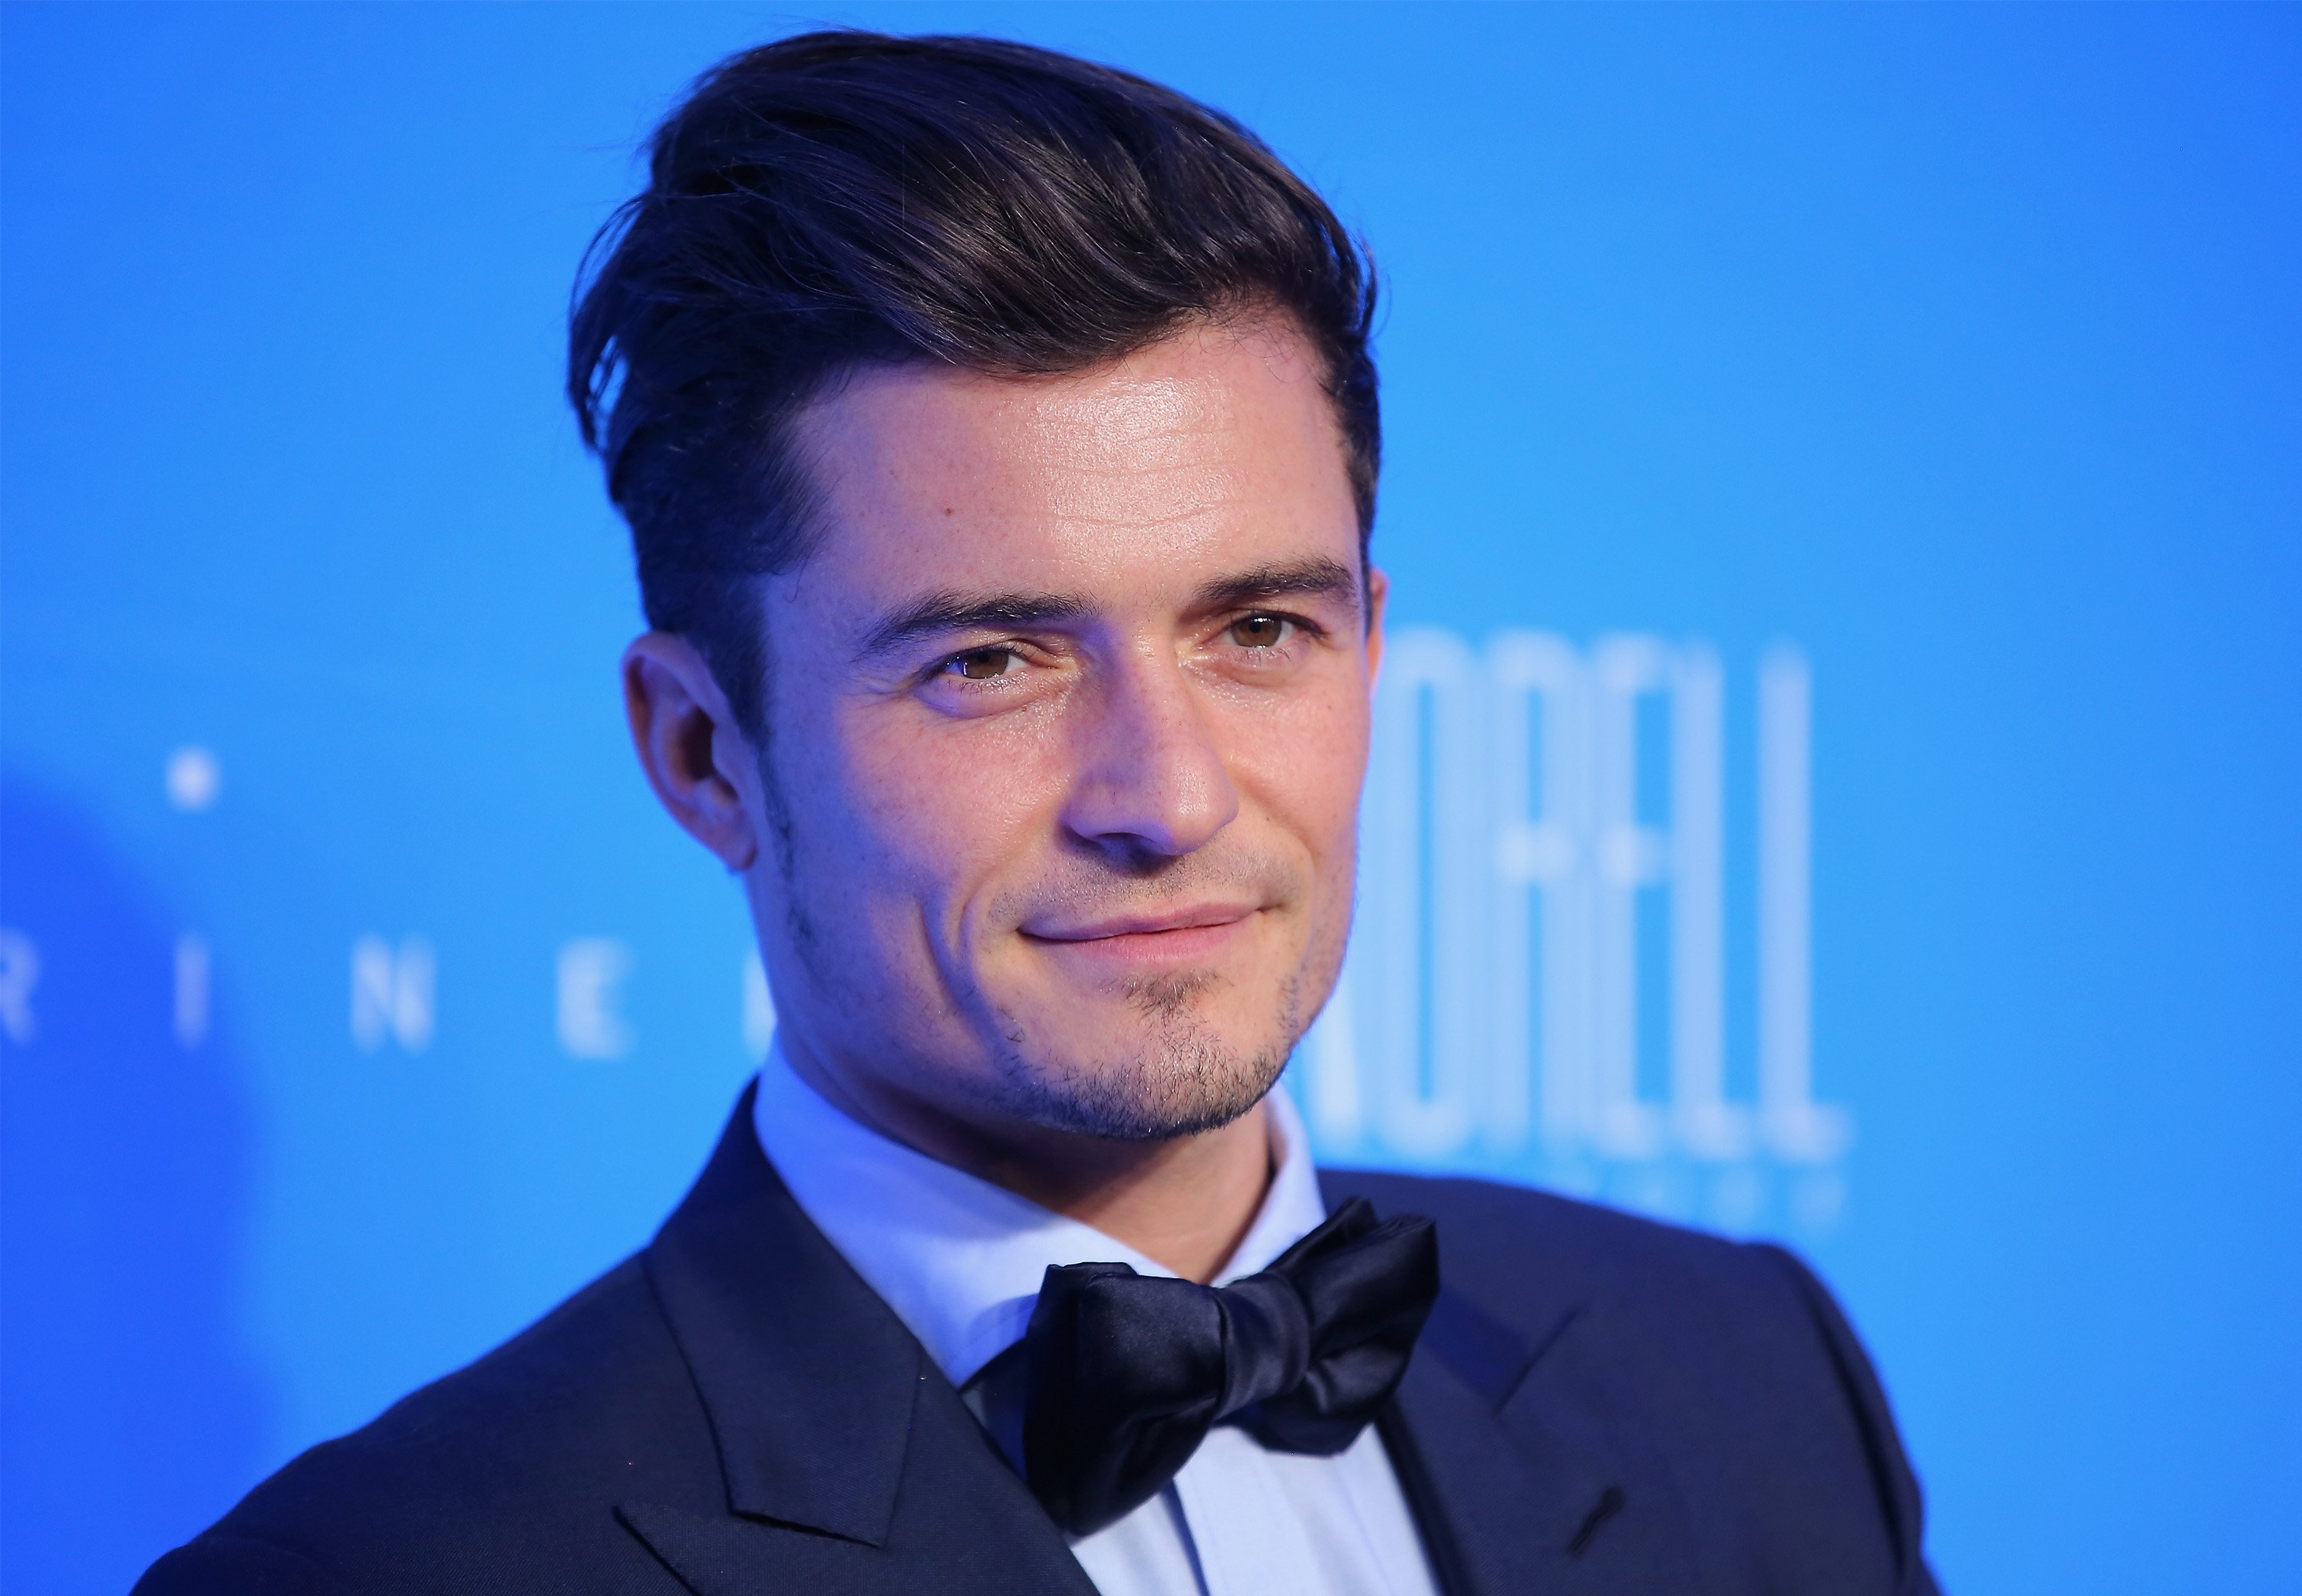 Orlando Bloom attends the 11th Annual UNICEF Snowflake Ball at Cipriani, Wall Street on December 1, 2015 in New York City | Photo: Getty Images